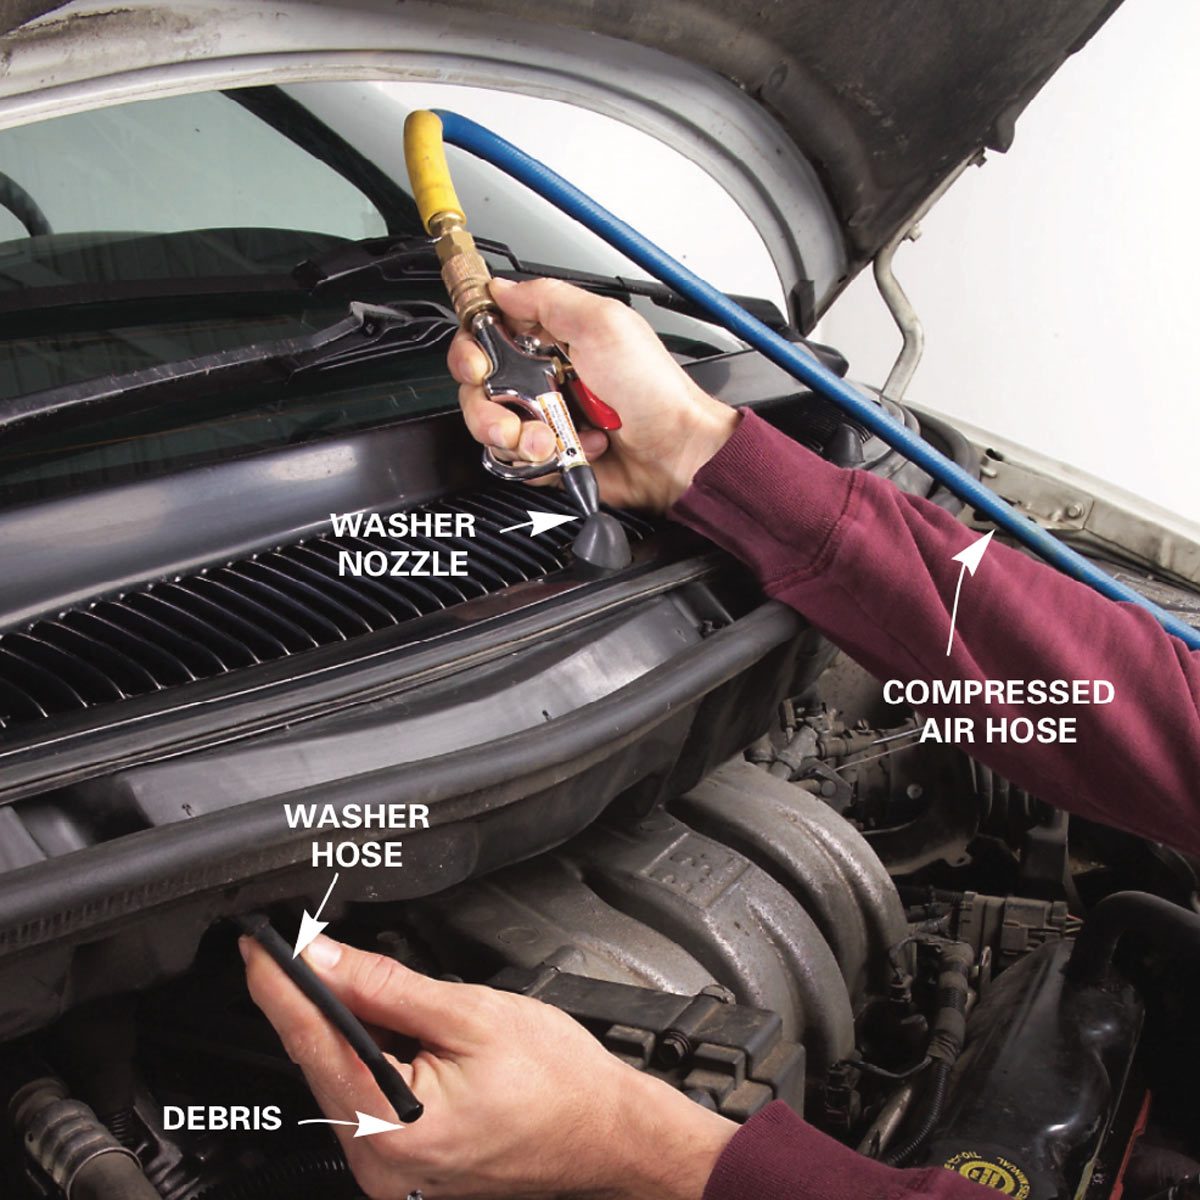 Windshield Washer Repair: How to Fix Your Window Washer ... 01 05 civic fuse box diagram 